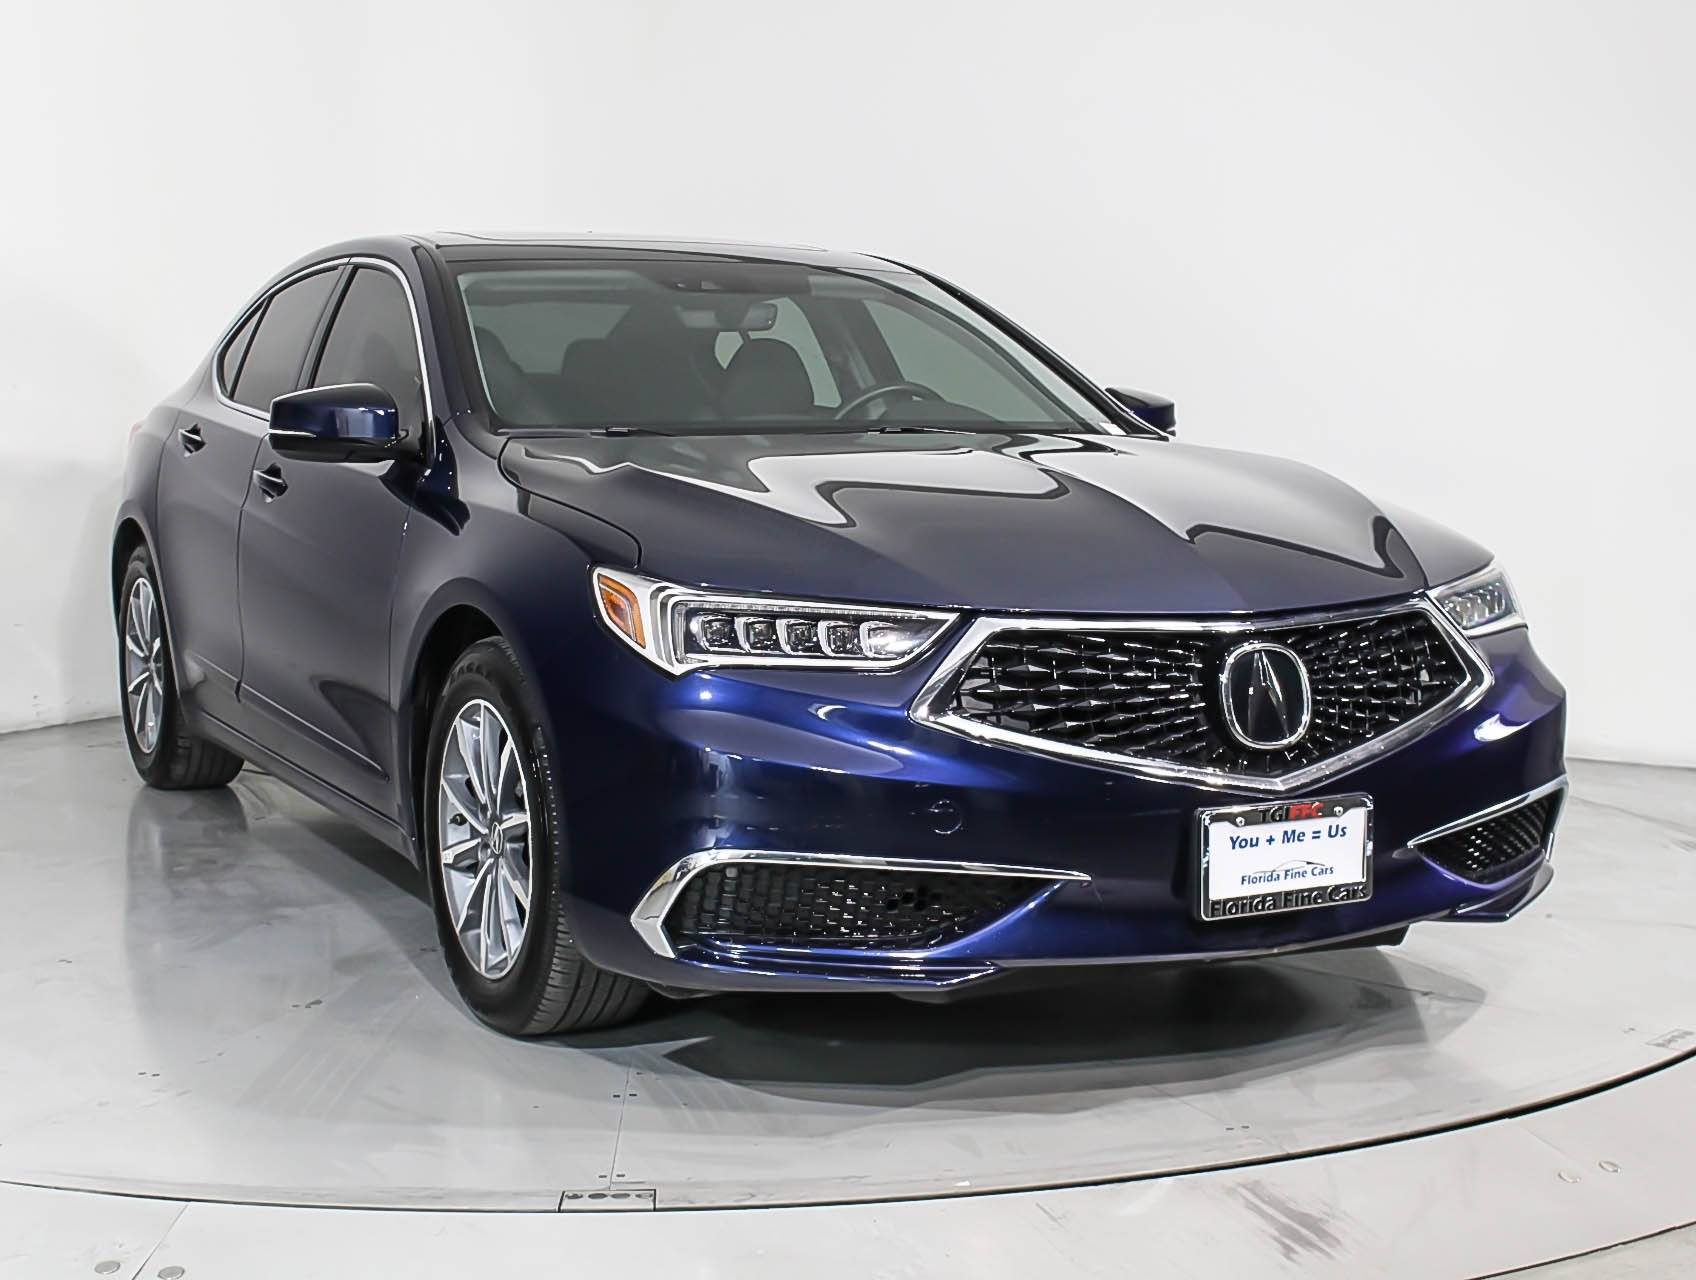 Florida Fine Cars - Used ACURA TLX 2018 MIAMI TECHNOLOGY PACKAGE